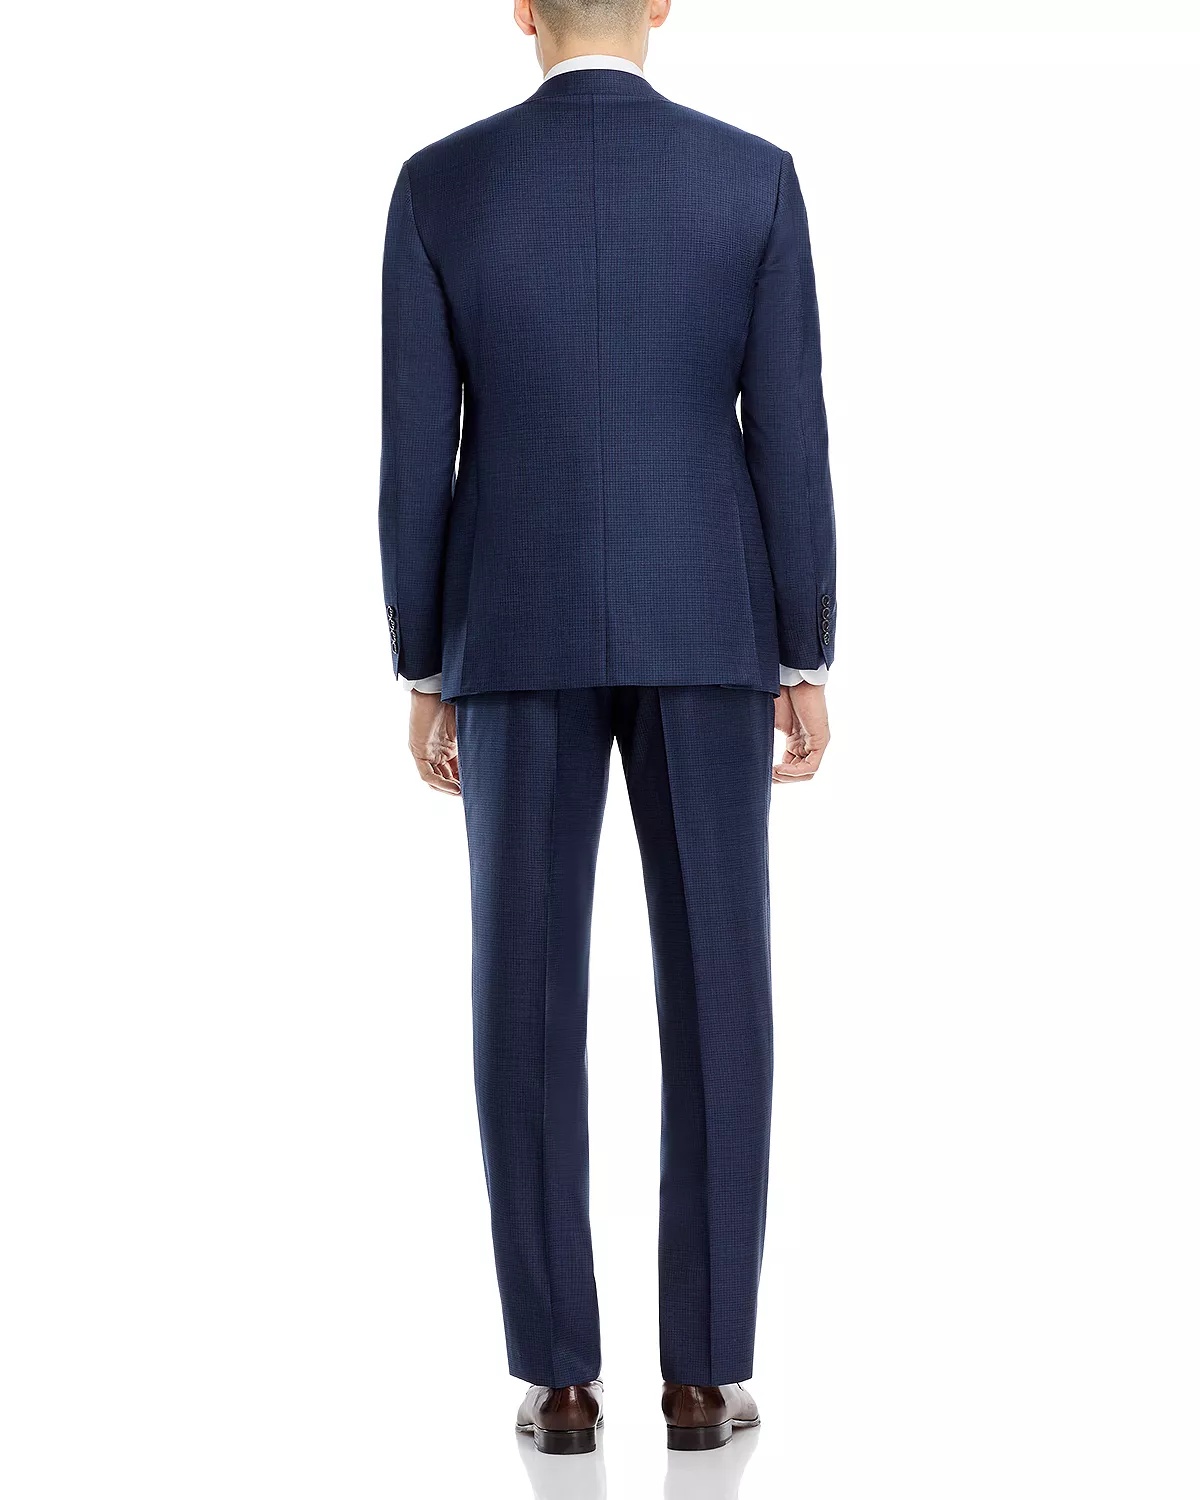 Siena Sharkskin Micro Check Classic Fit Suit - 4